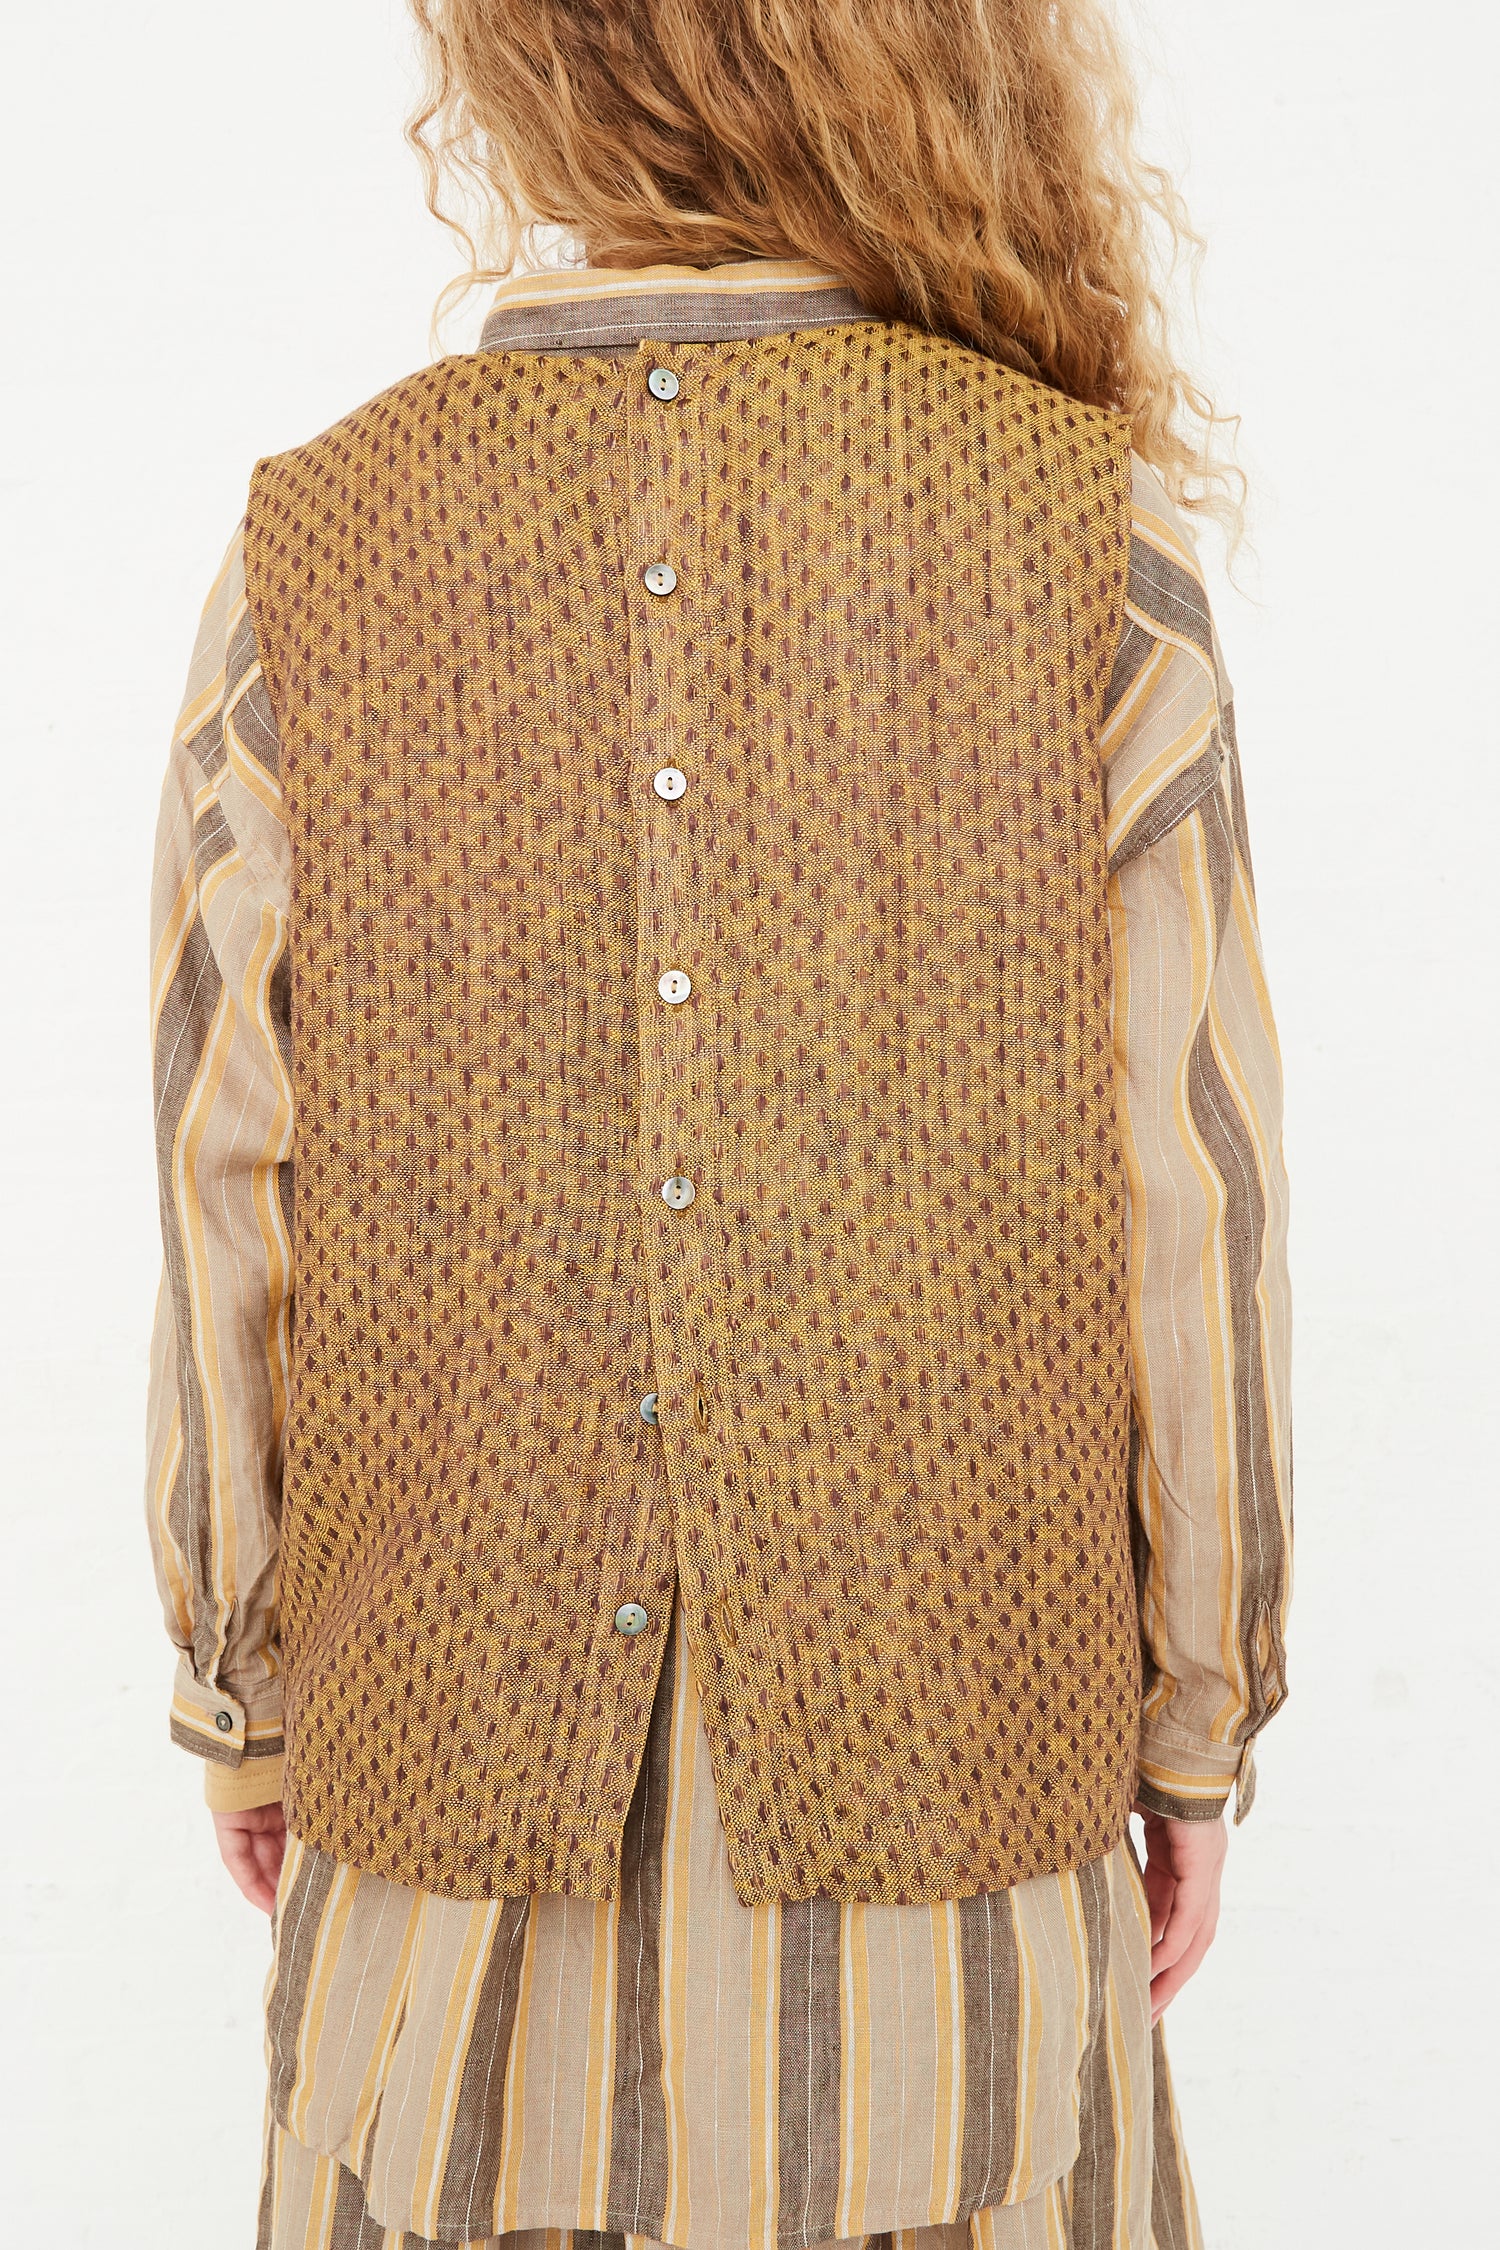 The back view of a model wearing an Ichi Antiquités Linen Dobby Pullover in Camel, available at Oroboro store in NYC.